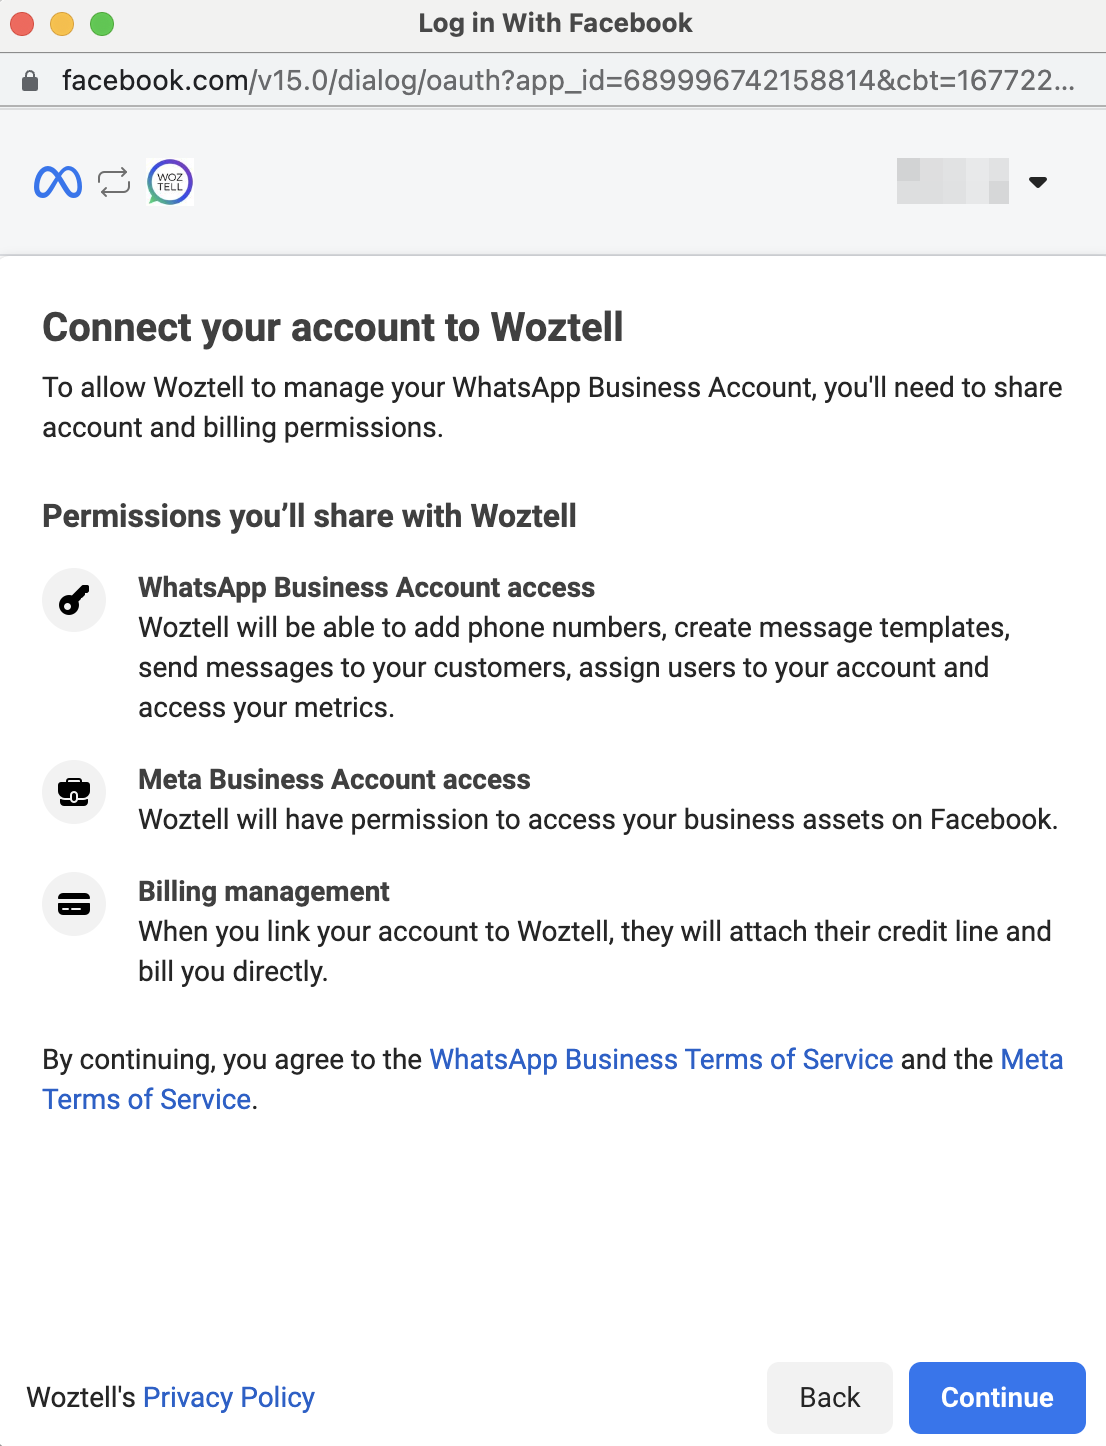 Share Account and Billing Permissions